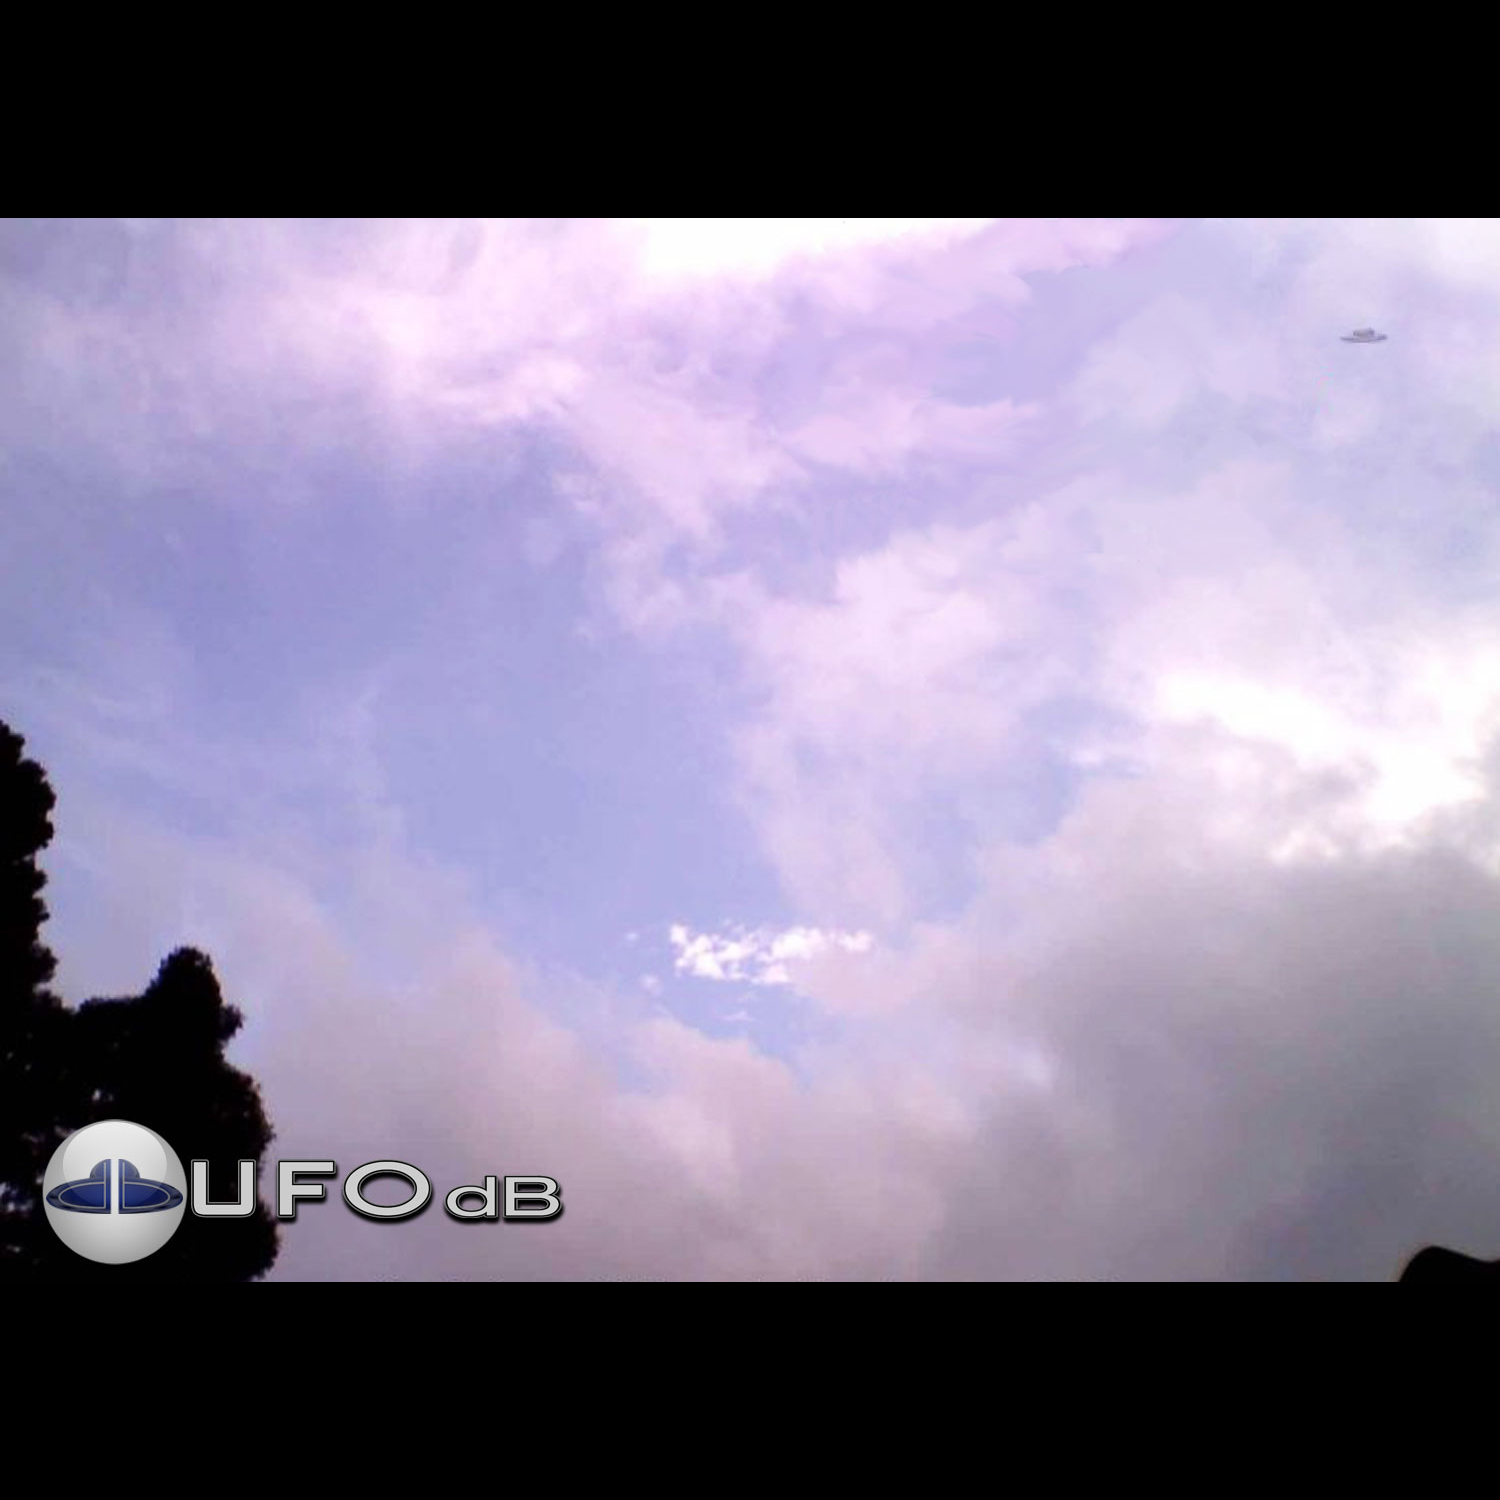 Hat Shaped UFO captured on picture in Shillong | India | August 2009 UFO Picture #224-1